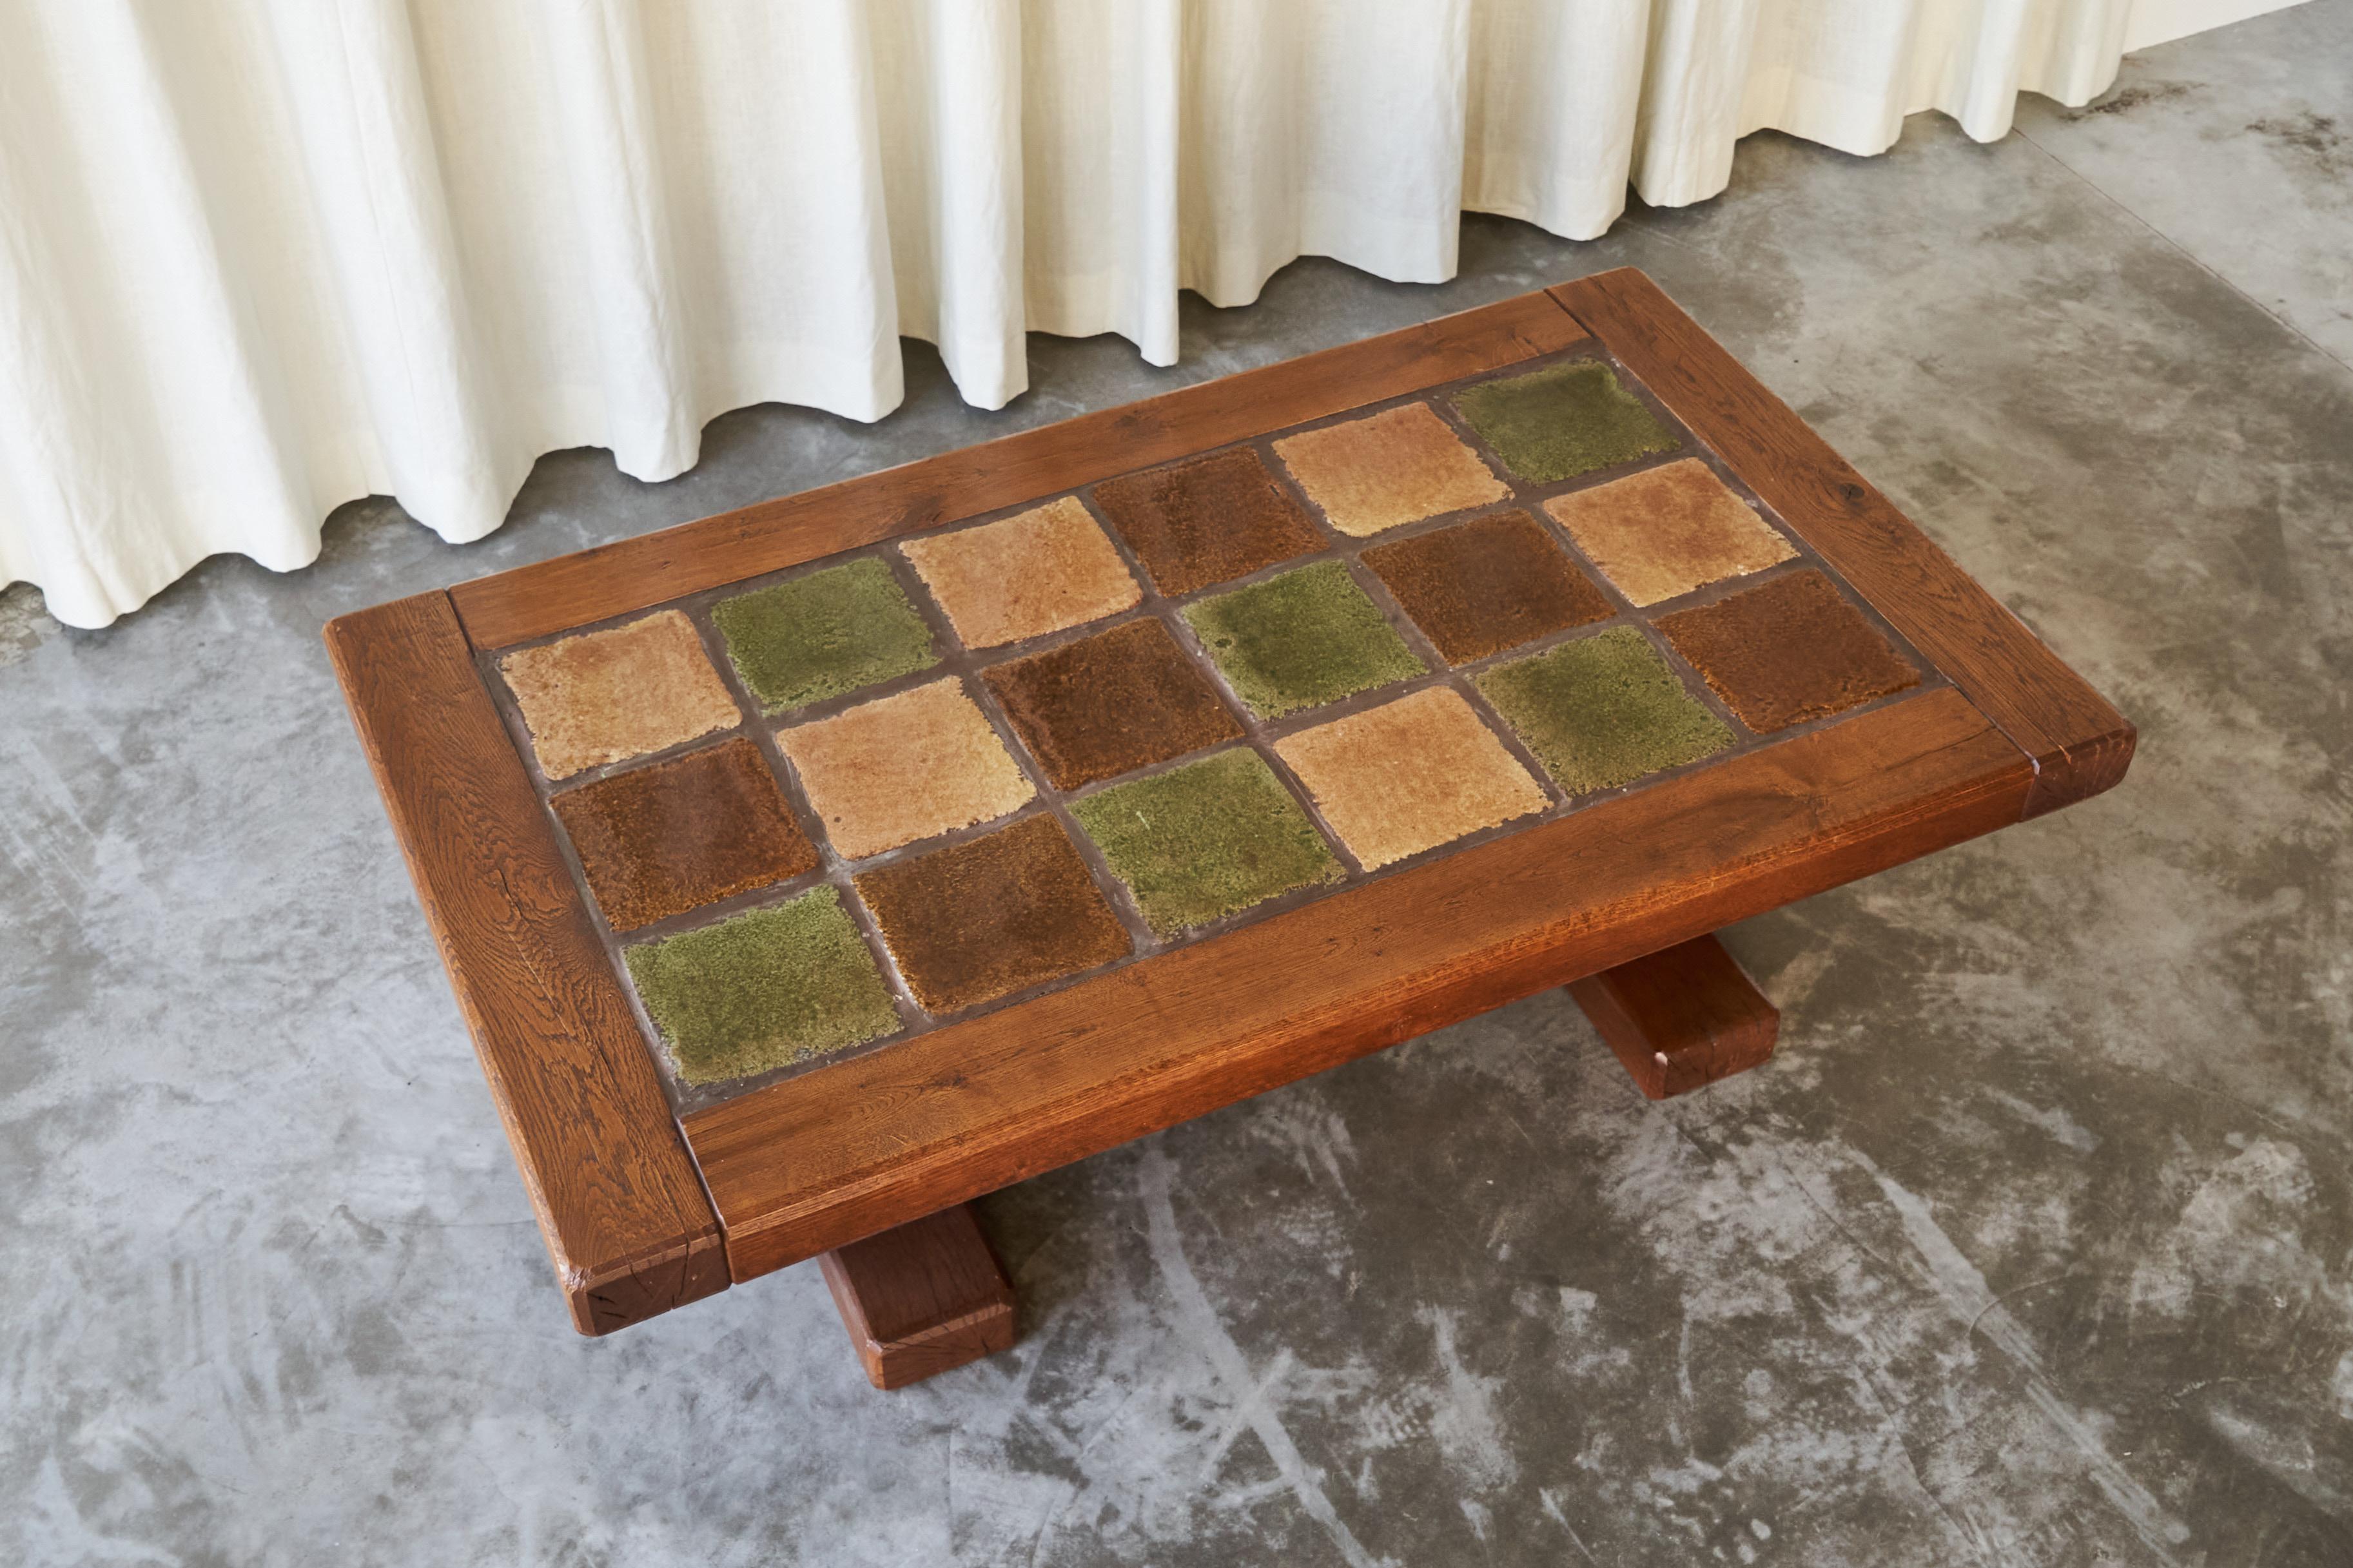 Constructivist Coffee Table in Solid Oak and Ceramic 1960s In Good Condition For Sale In Tilburg, NL